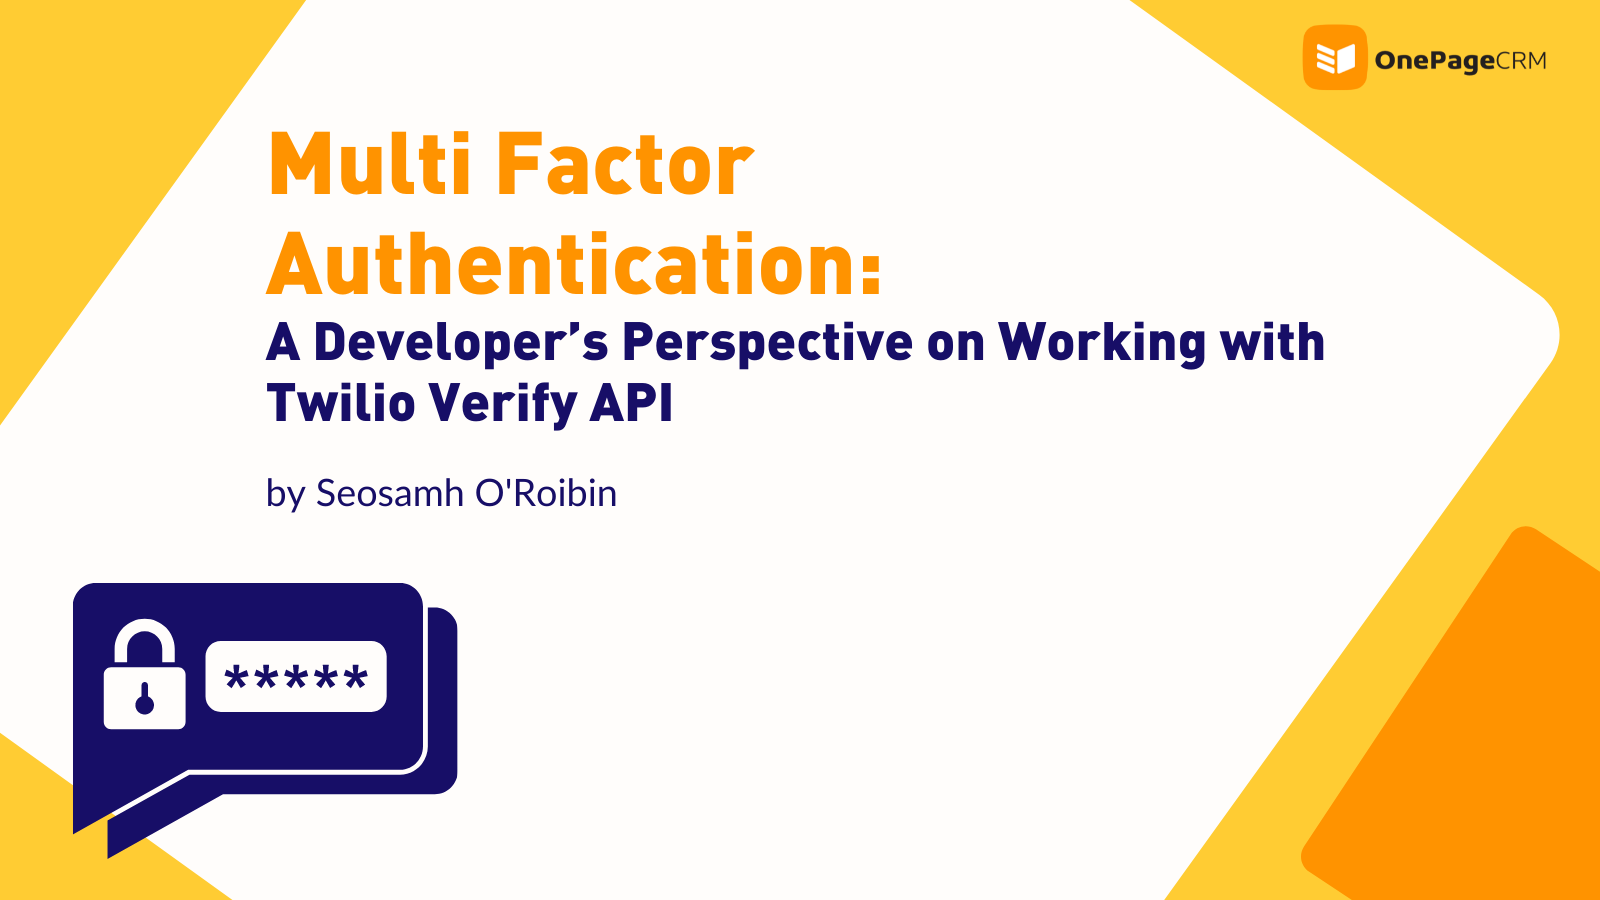 Multi Factor Authentication: A Developer’s Perspective on Working with Twilio Verify API